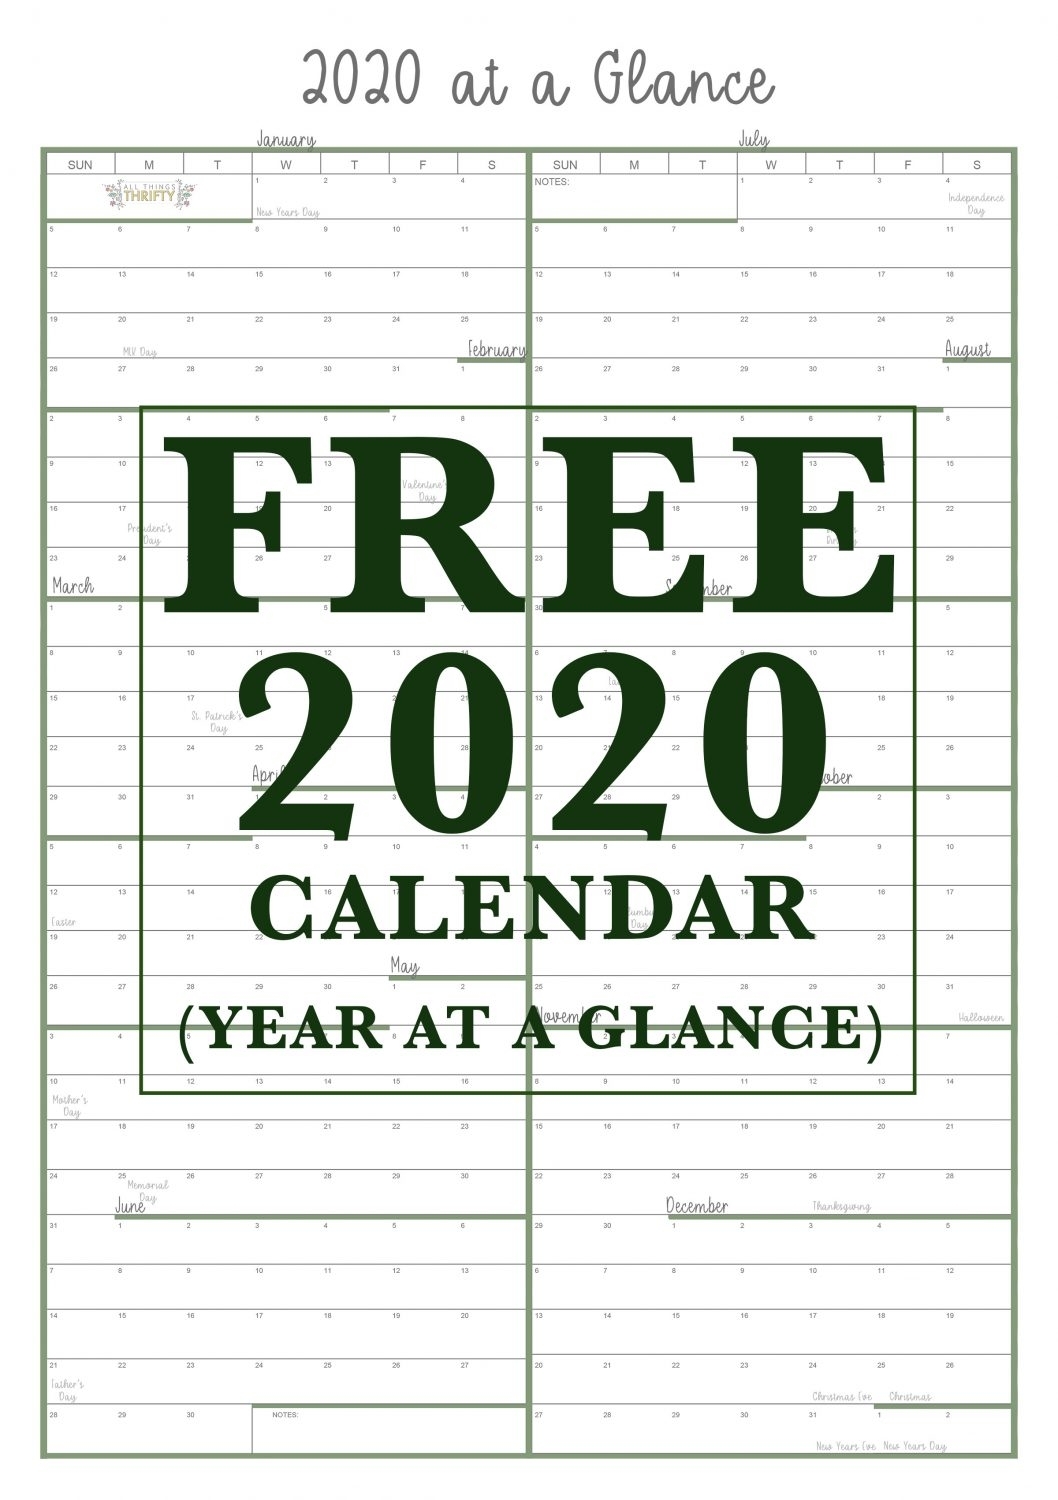 Year At A Glance Free Printable Calendar | All Things Thrifty for Free Printable Year At A Glance Calendars No Download 2020